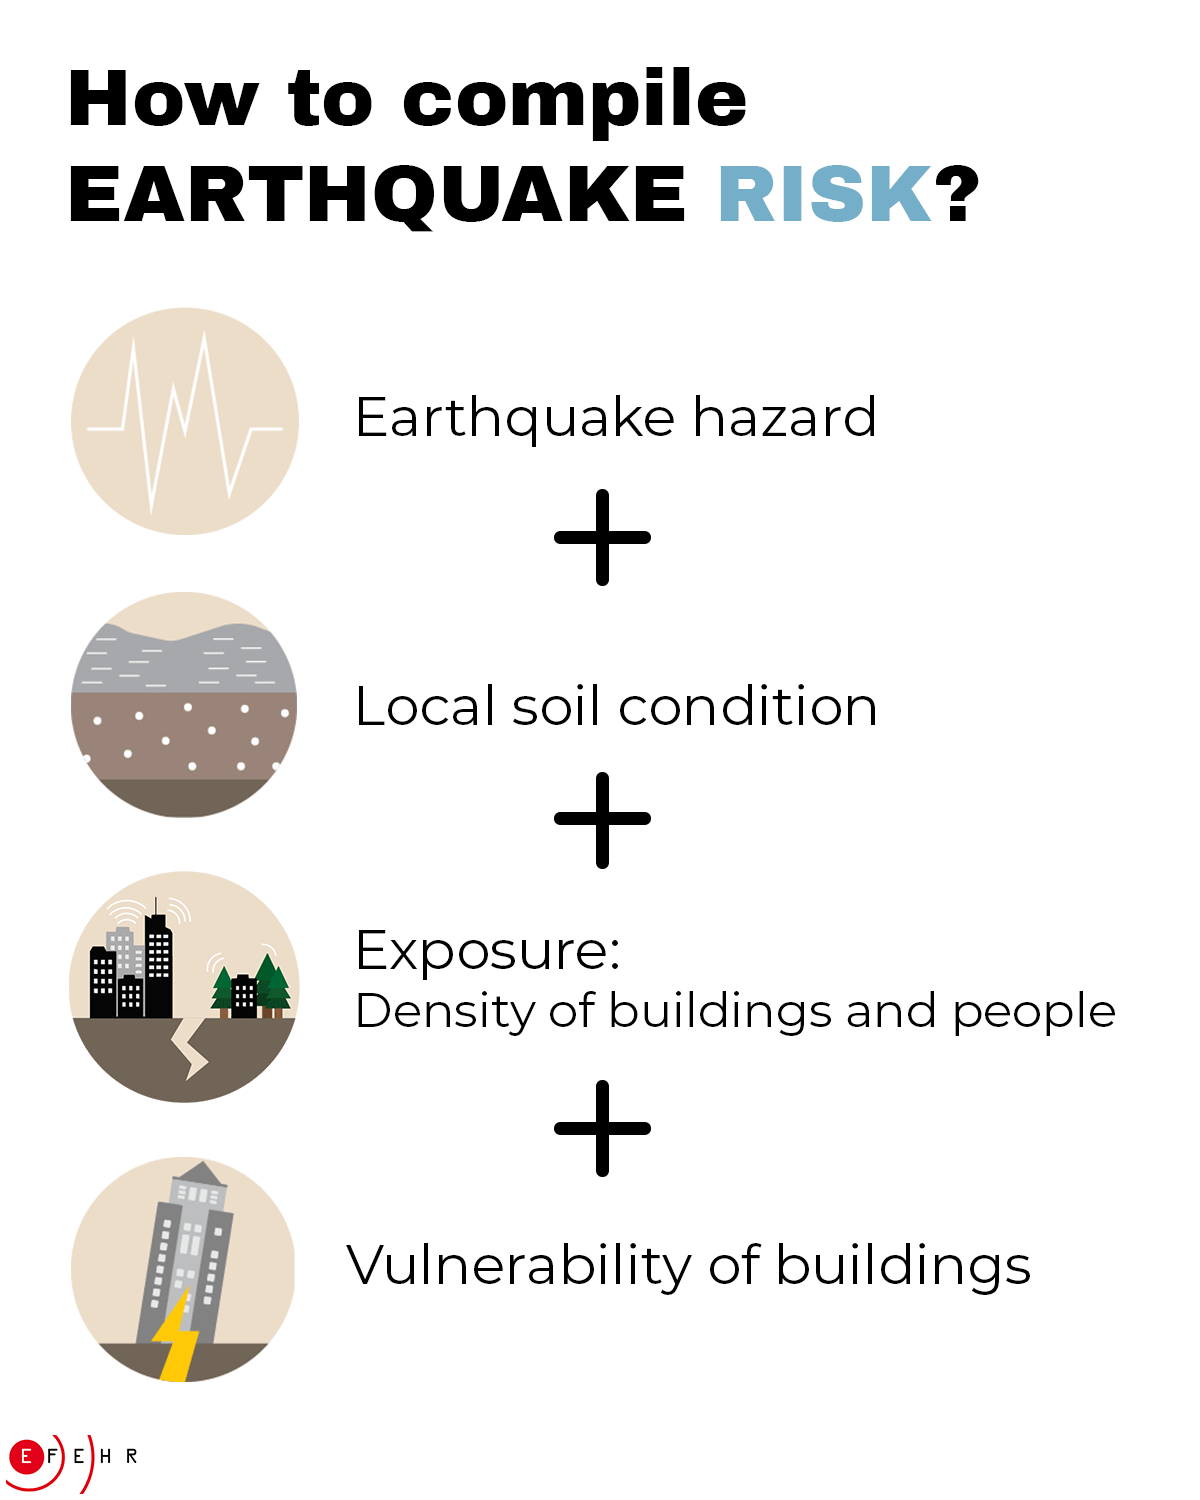 3) We can assess earthquake risk and other secondary phenomena triggered by earthquakes. 